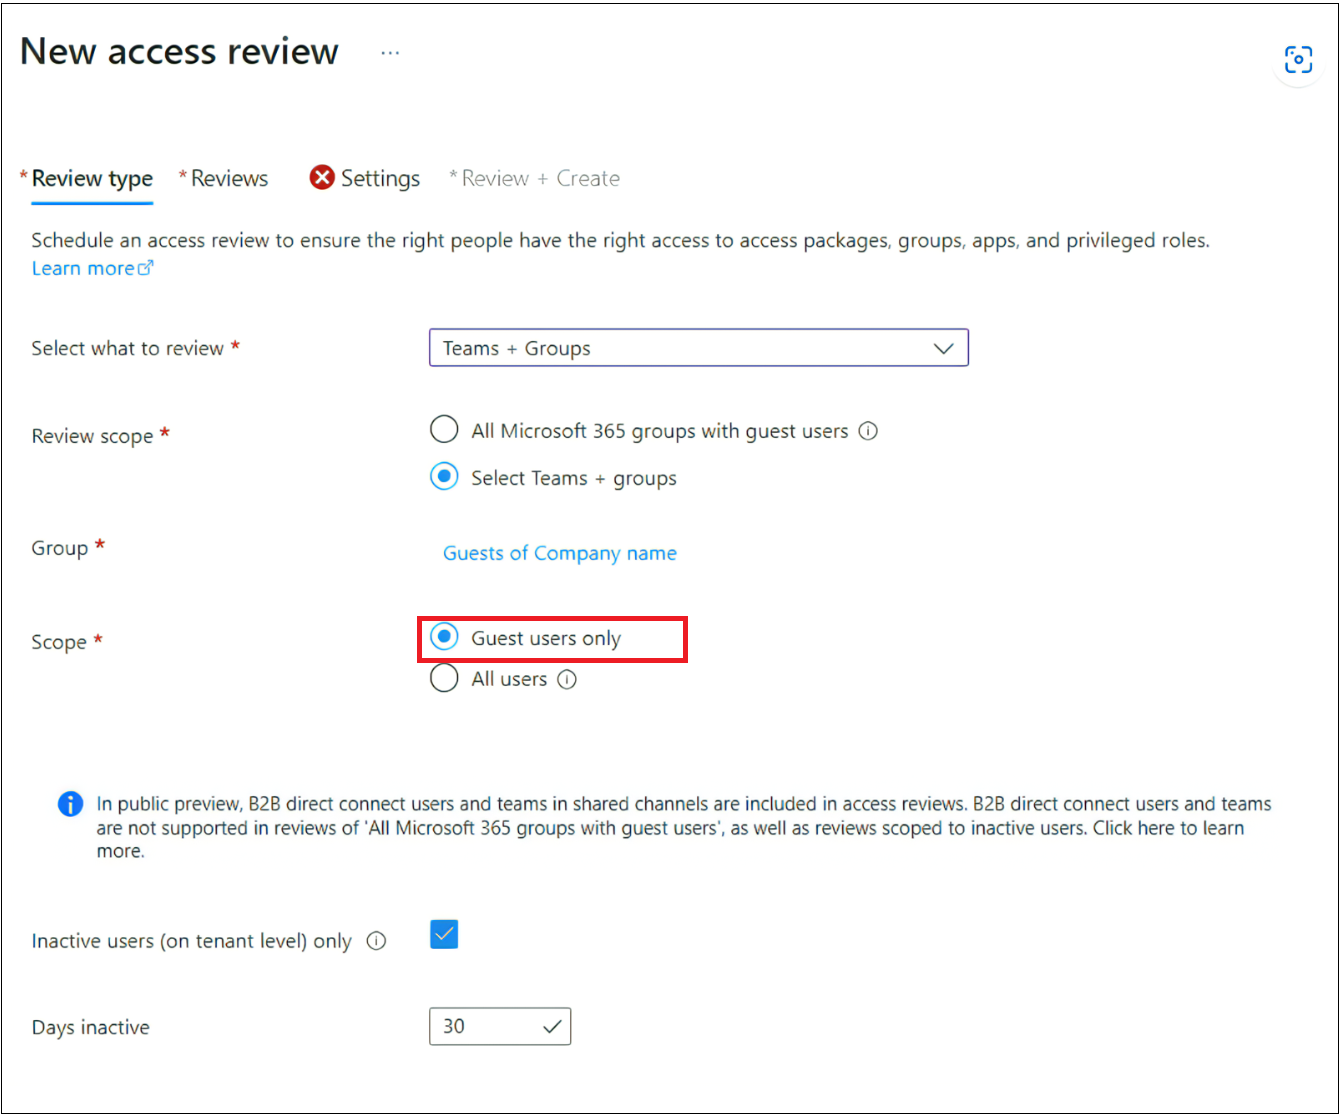 Screenshot of limiting the scope of the review to guest users only.